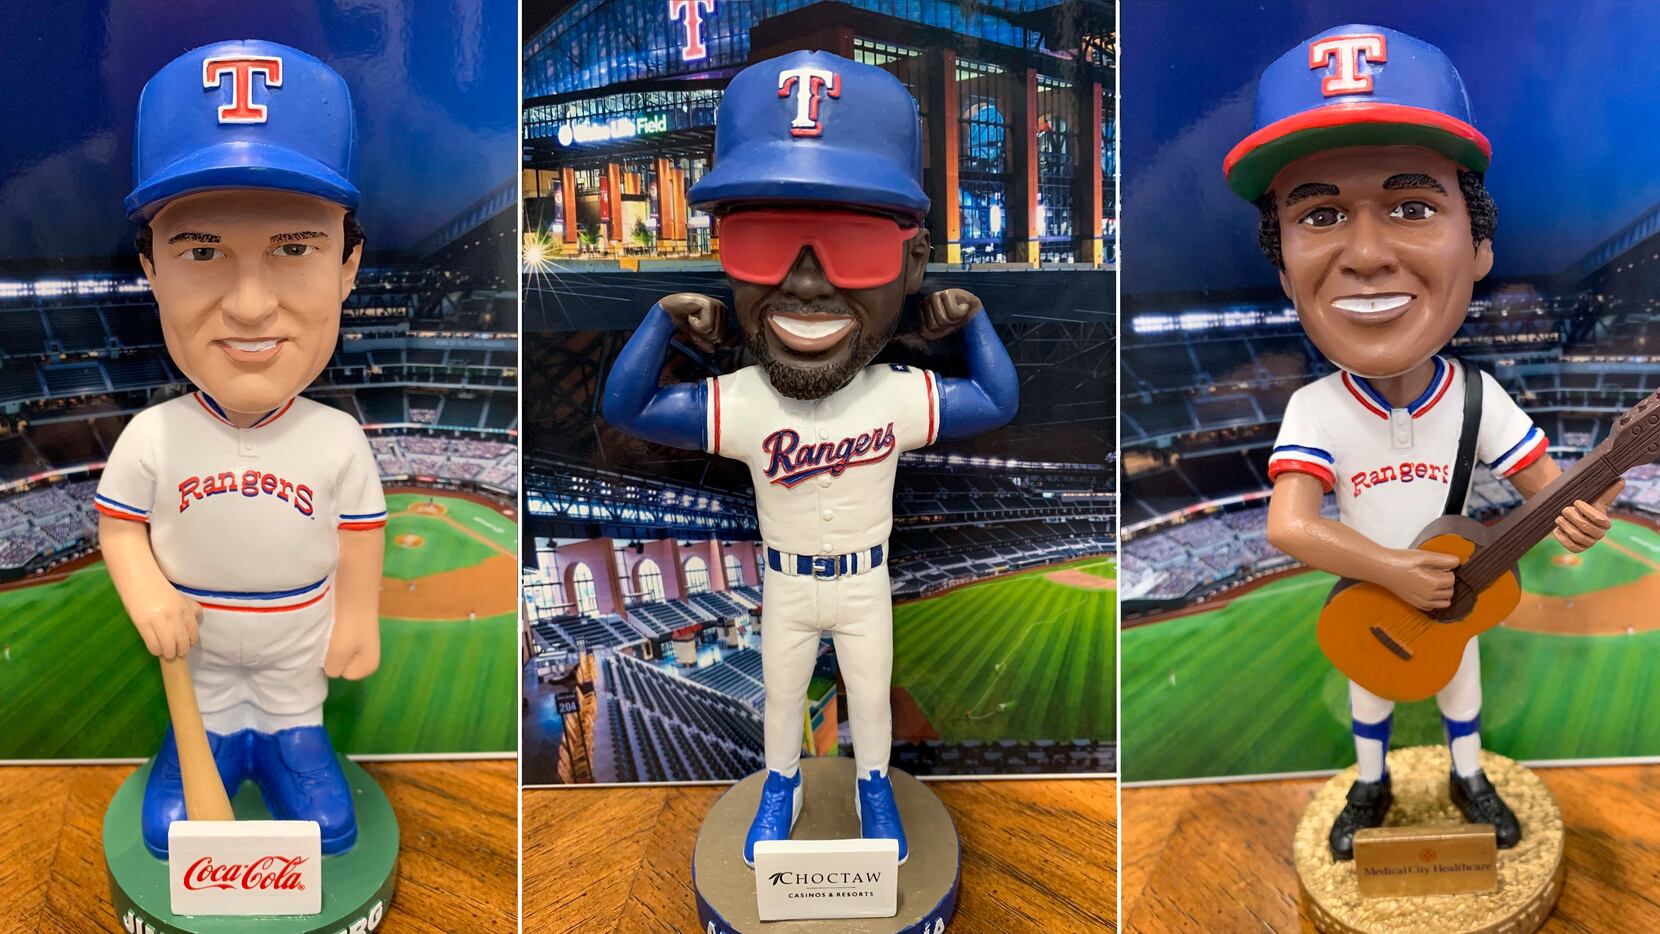 Rangers' 2022 promotional schedule highlighted by bobblehead, jersey  giveaways